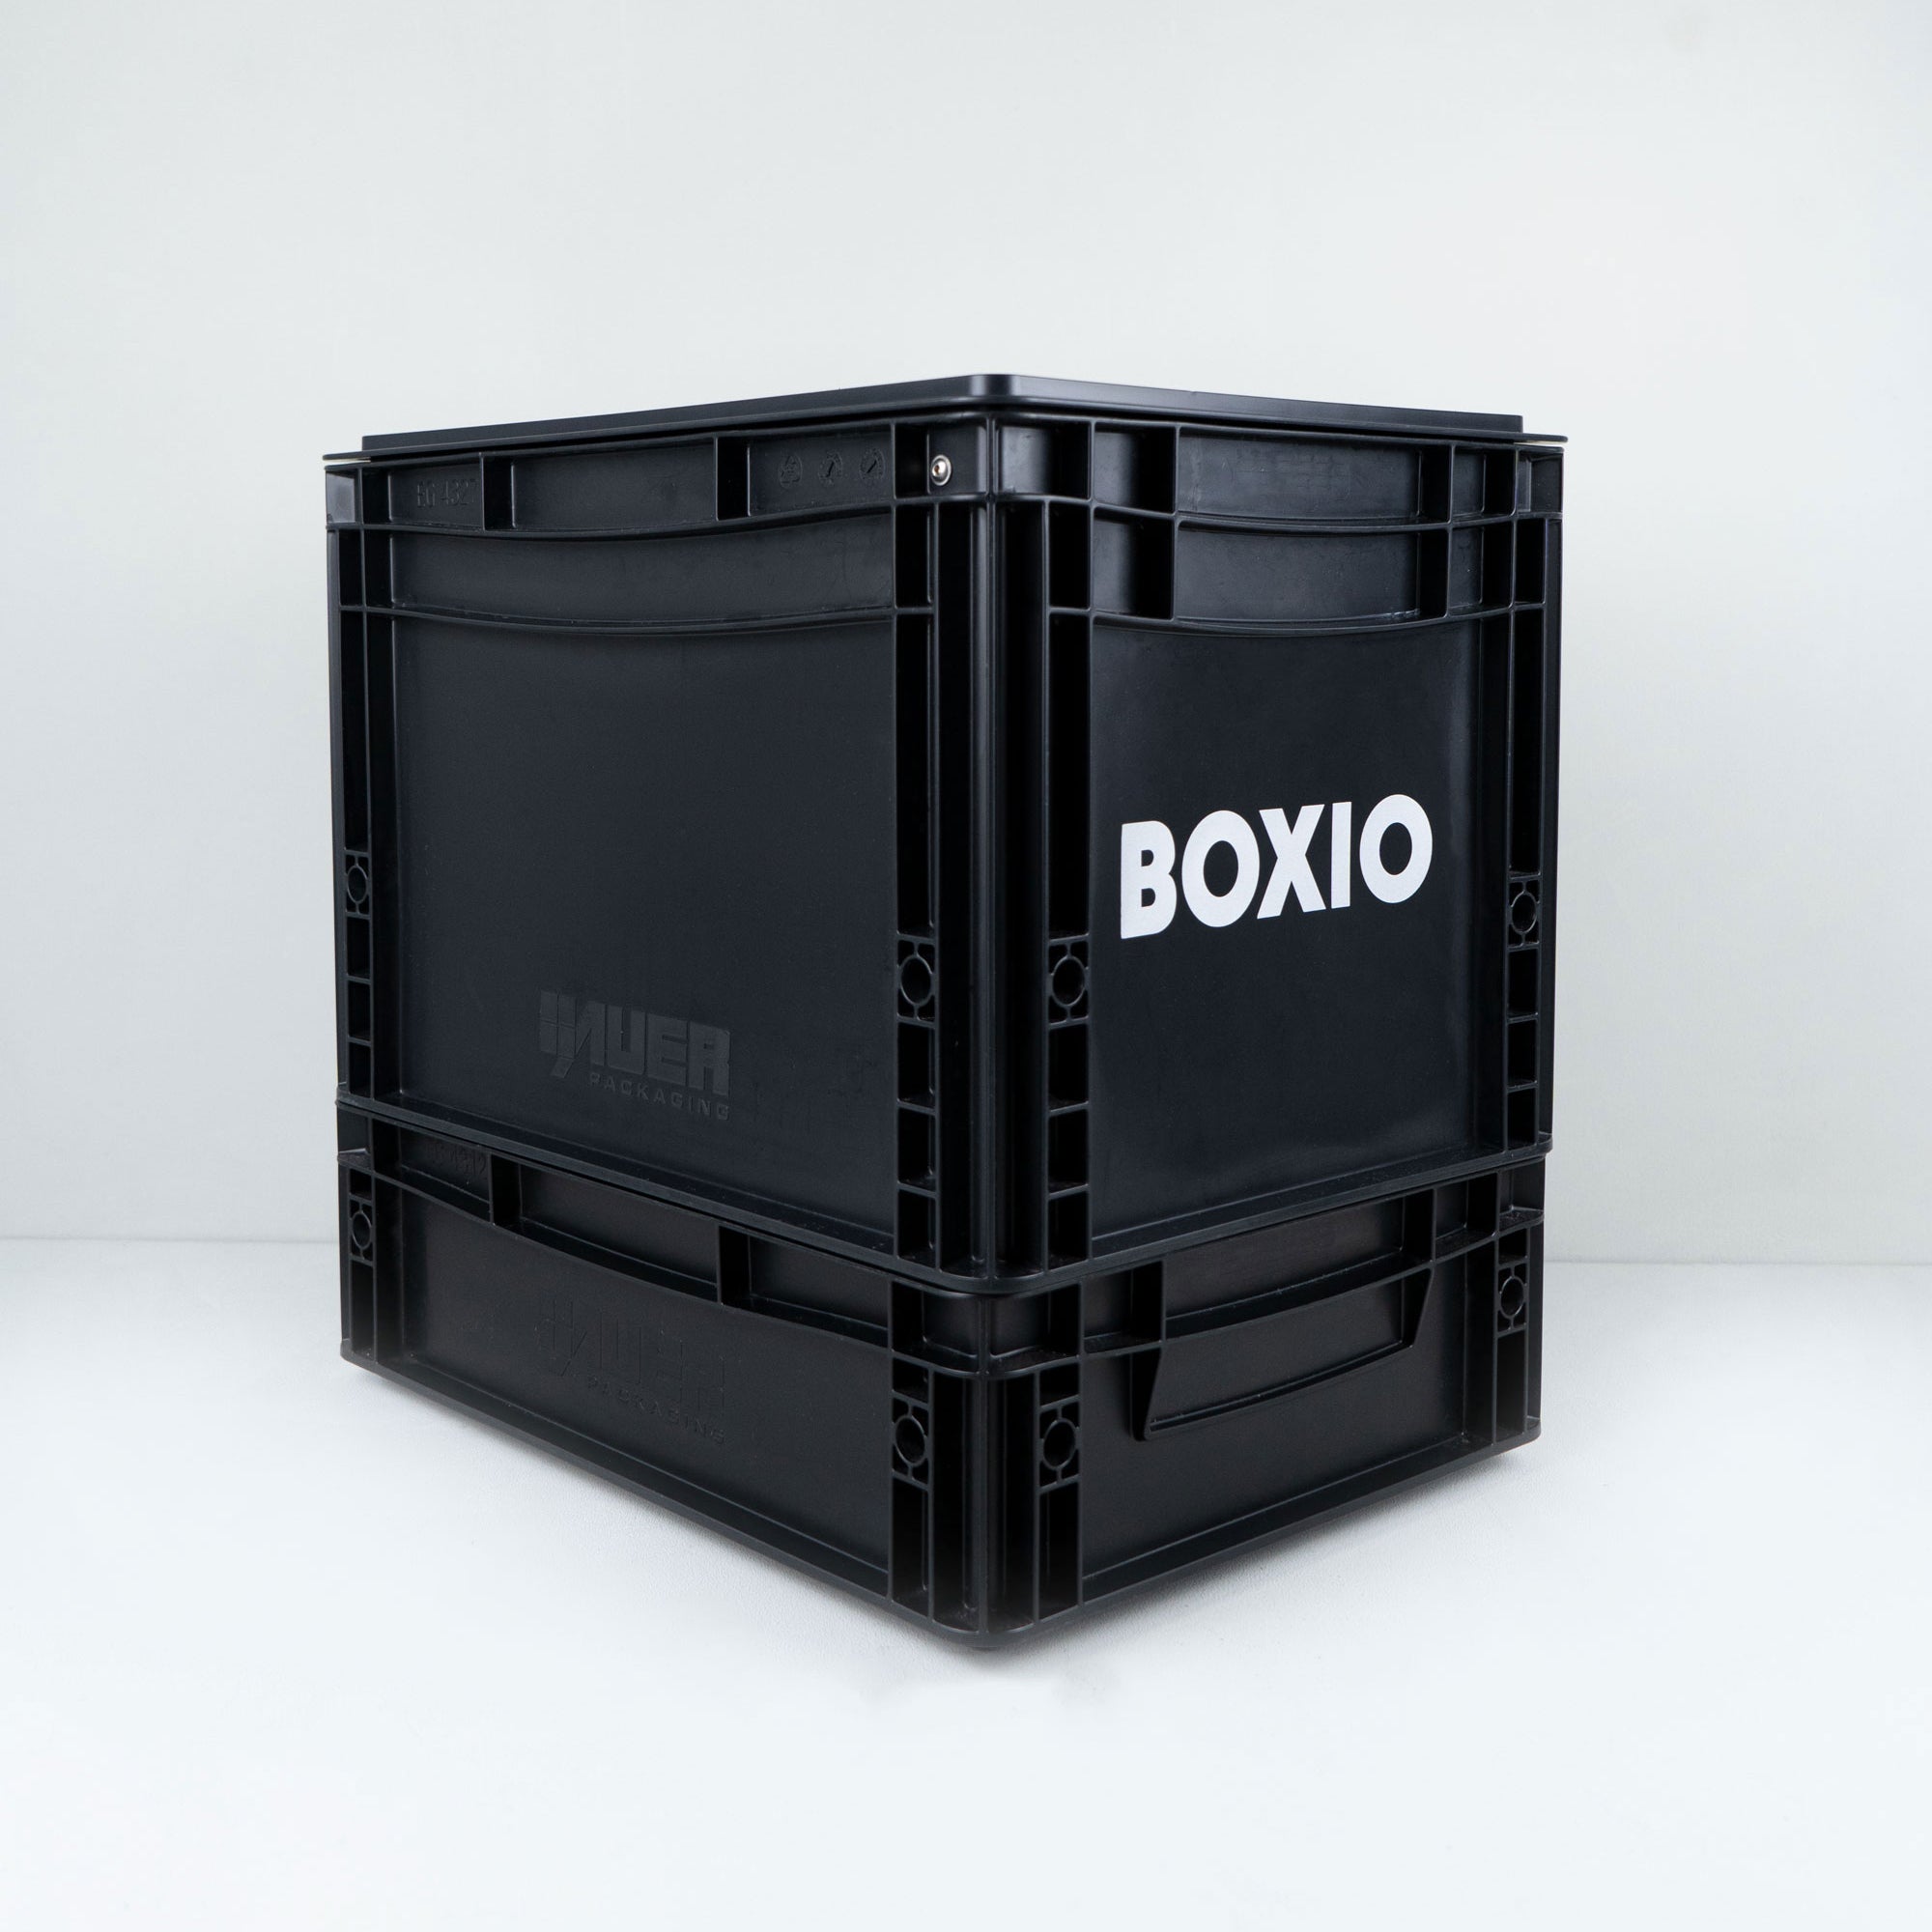 BOXIO - Solo: Storage Box with Lid - Eurobox 15,7 x 11,8 x 11 - Perfect Plastic Transport Box for Camping, Boat or Garden - Stackable with Other